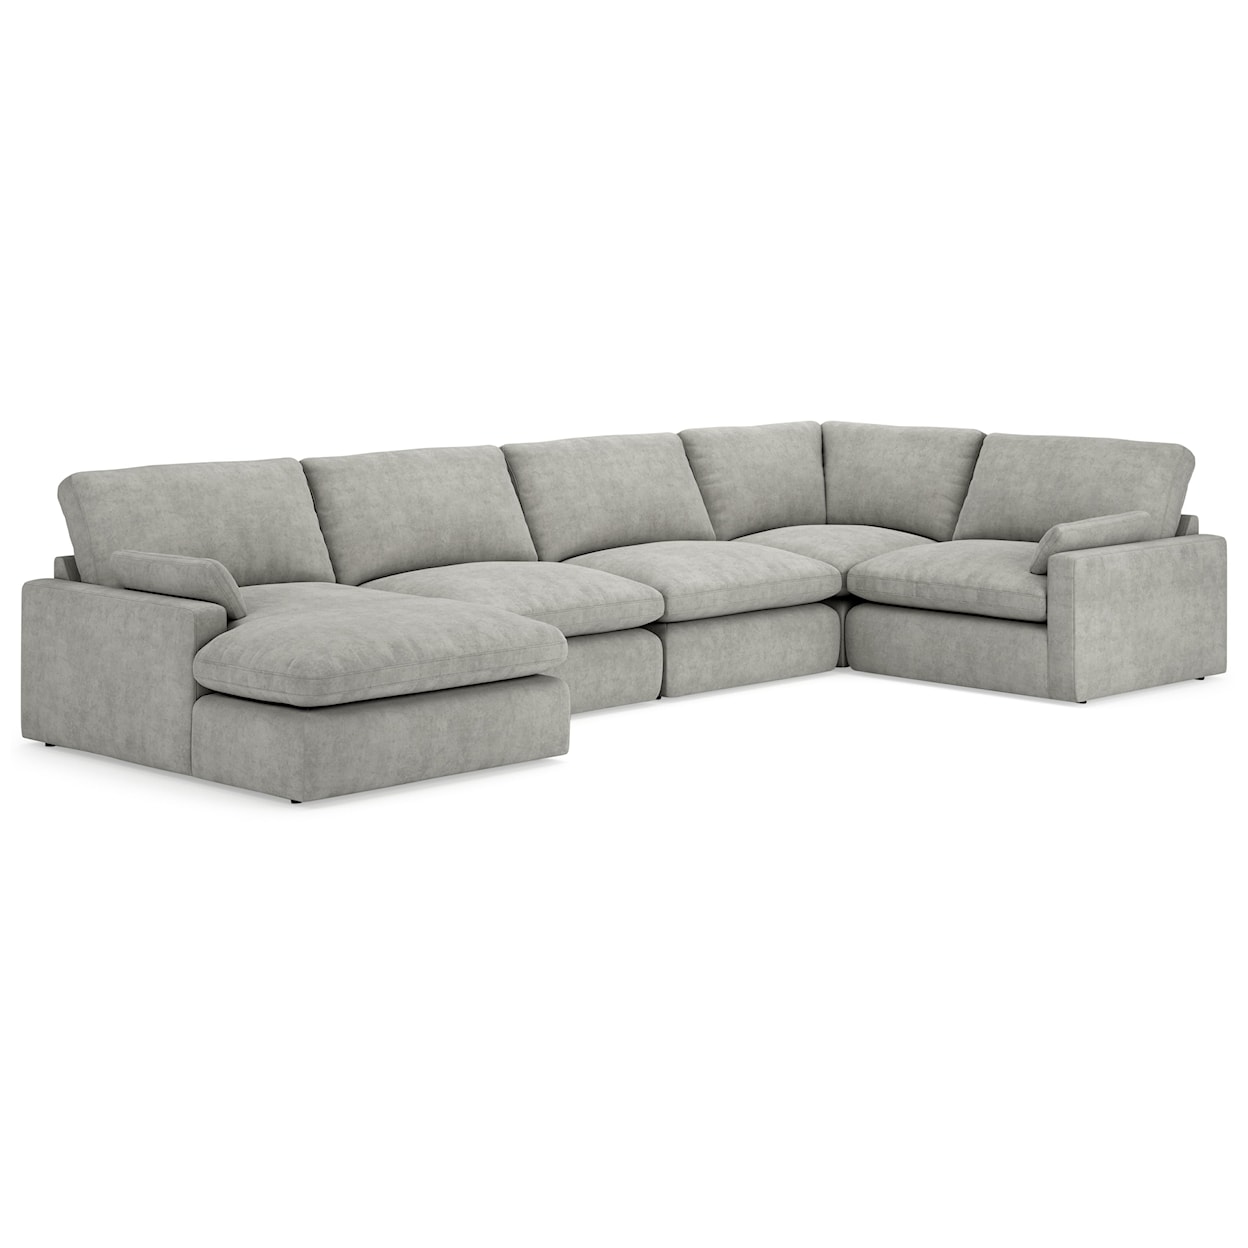 Ashley Furniture Signature Design Sophie 5-Piece Sectional with Chaise